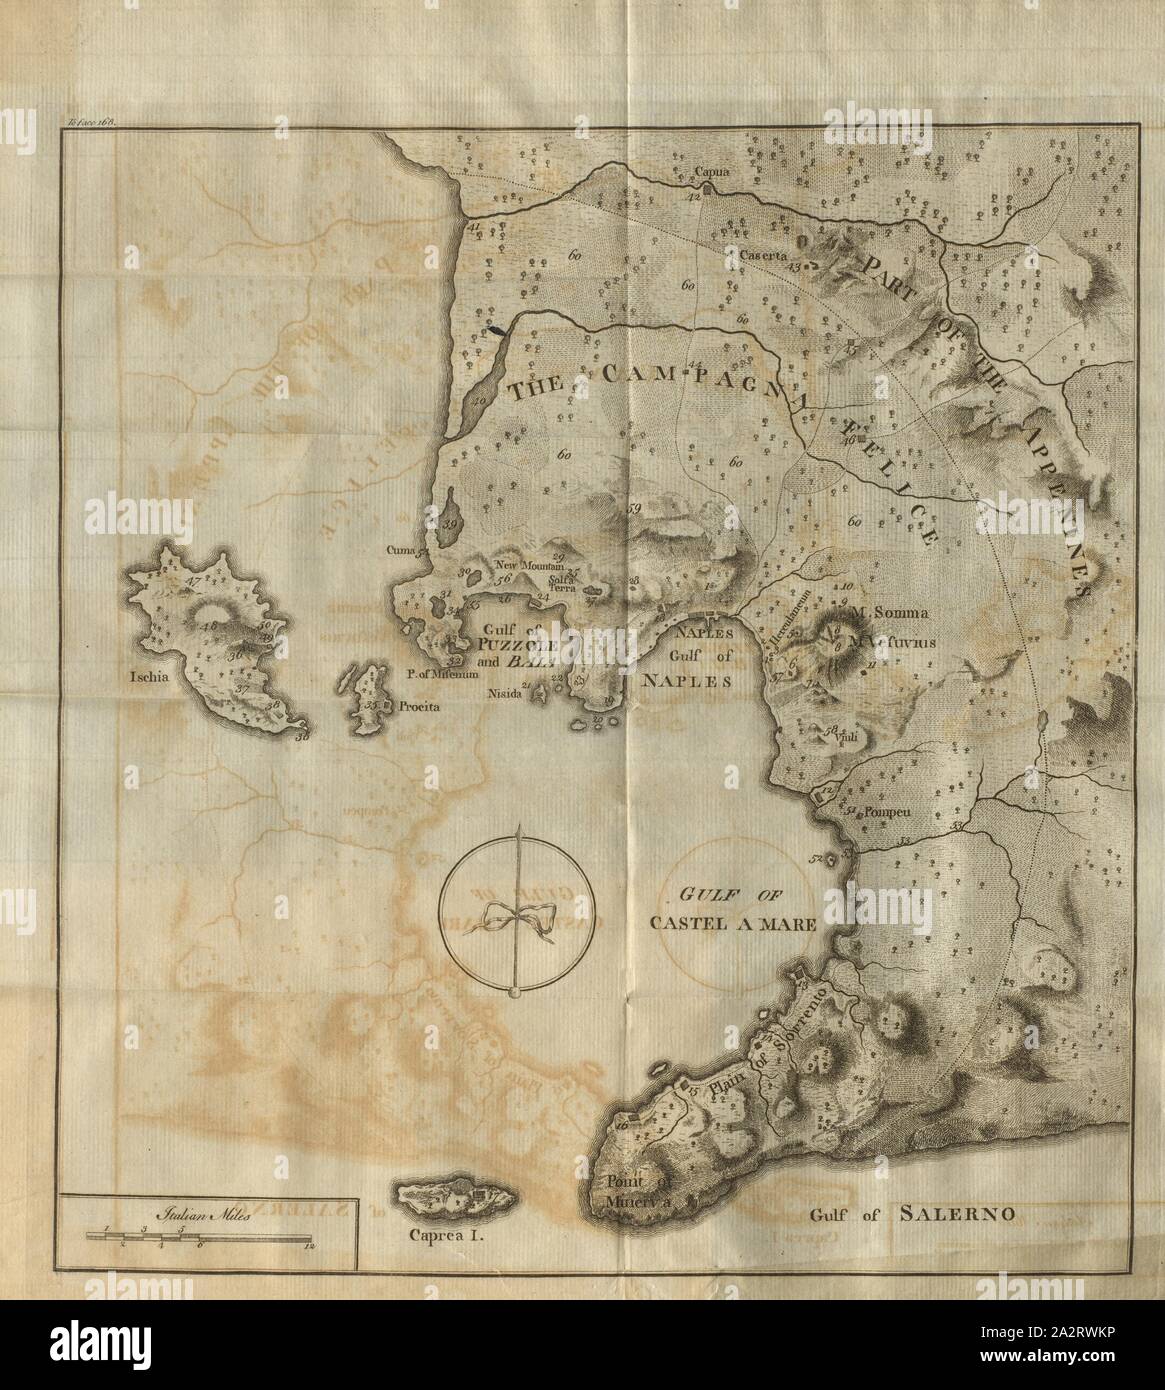 Map of the region Naples, Map of the Naples region, with Mount Vesuvius and the Gulf of Castel a Mare, 18th century, Plate VI, after 168, 1773, William Hamilton: Observations on Mount Vesuvius, Mount Etna, and other volcanos: in a series of letters, addressed to the Royal Society from [...] W. Hamilton [...]: to which are added, explanatory notes by the author, hitherto unpublished. London: printed for T. Cadell, 1773 Stock Photo